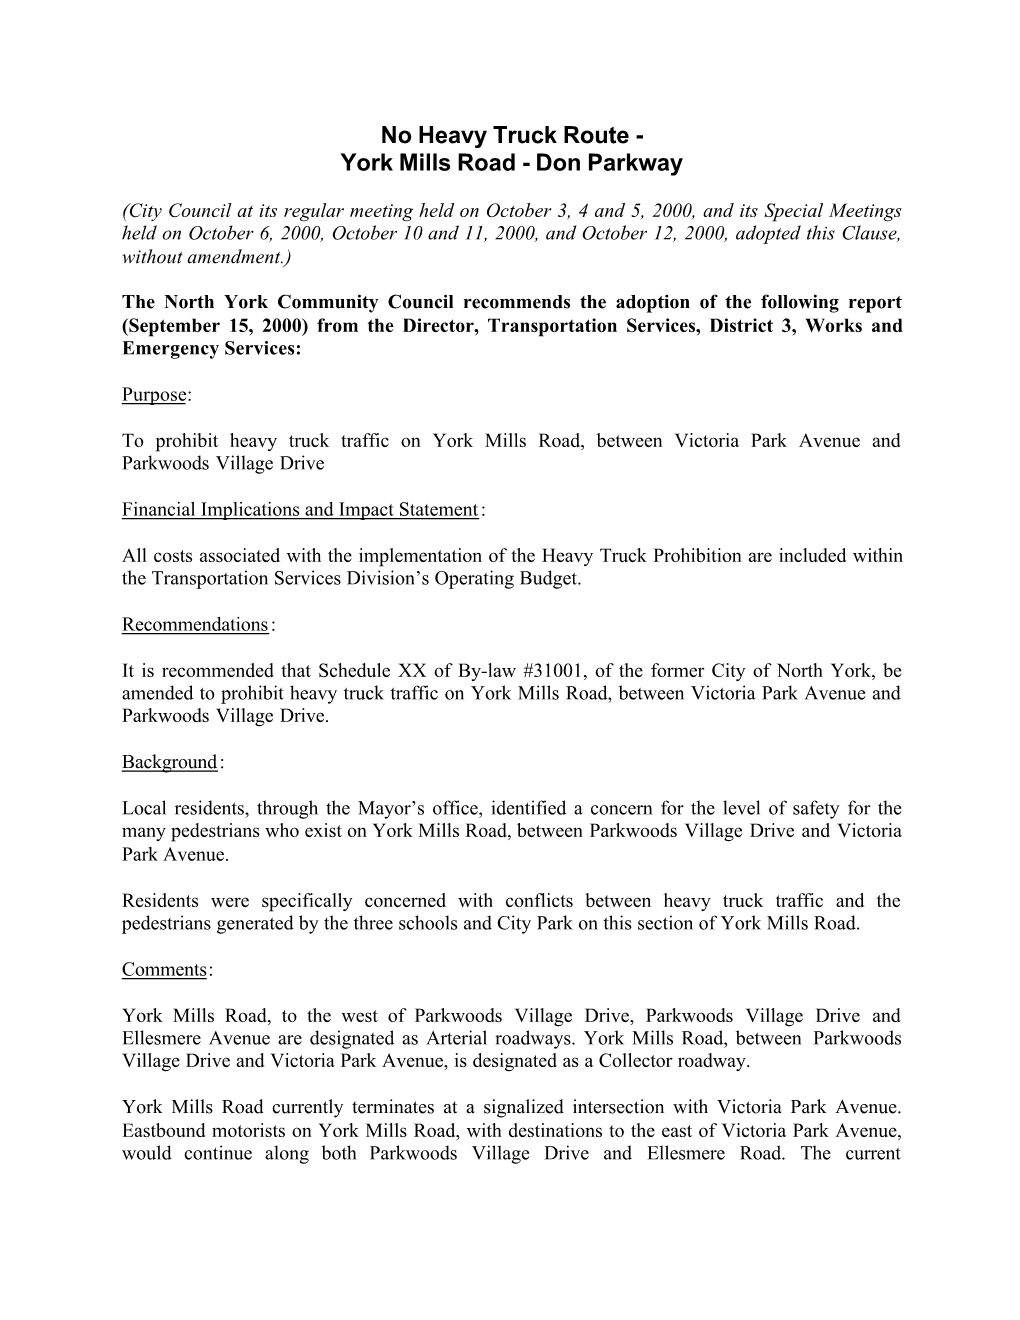 No Heavy Truck Route - York Mills Road - Don Parkway